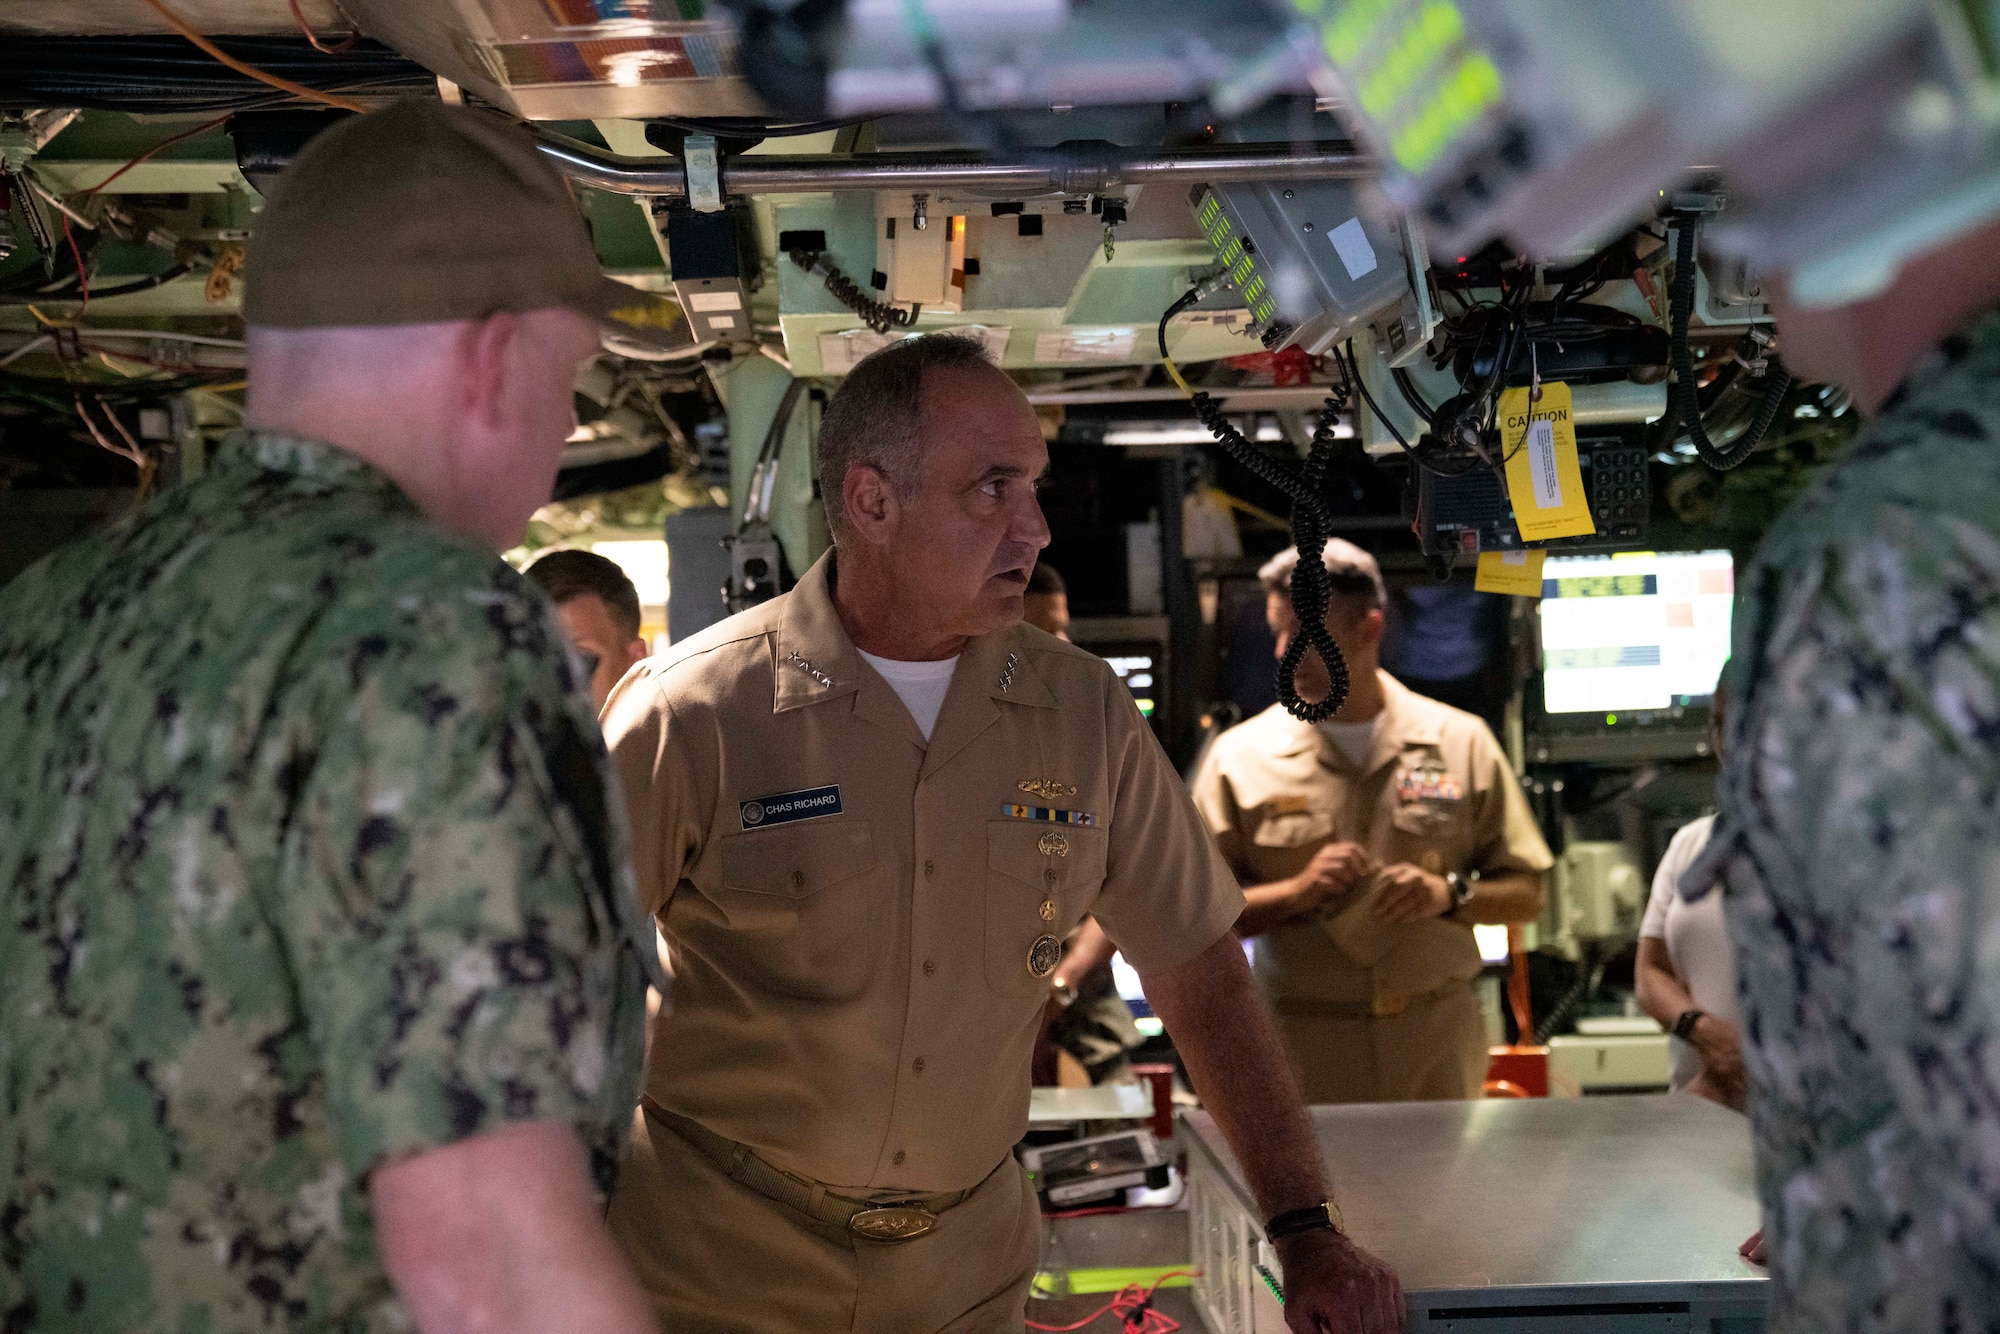 Admiral Chas Richard, Commander, United States Strategic Command, receives a brief in the control room of the Virginia-class fast-attack submarine USS Illinois (SSN 786). Richard visited commands on Guam to see how they fit into the USSTRATCOM mission of deterring strategic attack and employing forces, as directed, to guarantee the security of the nation and its allies.